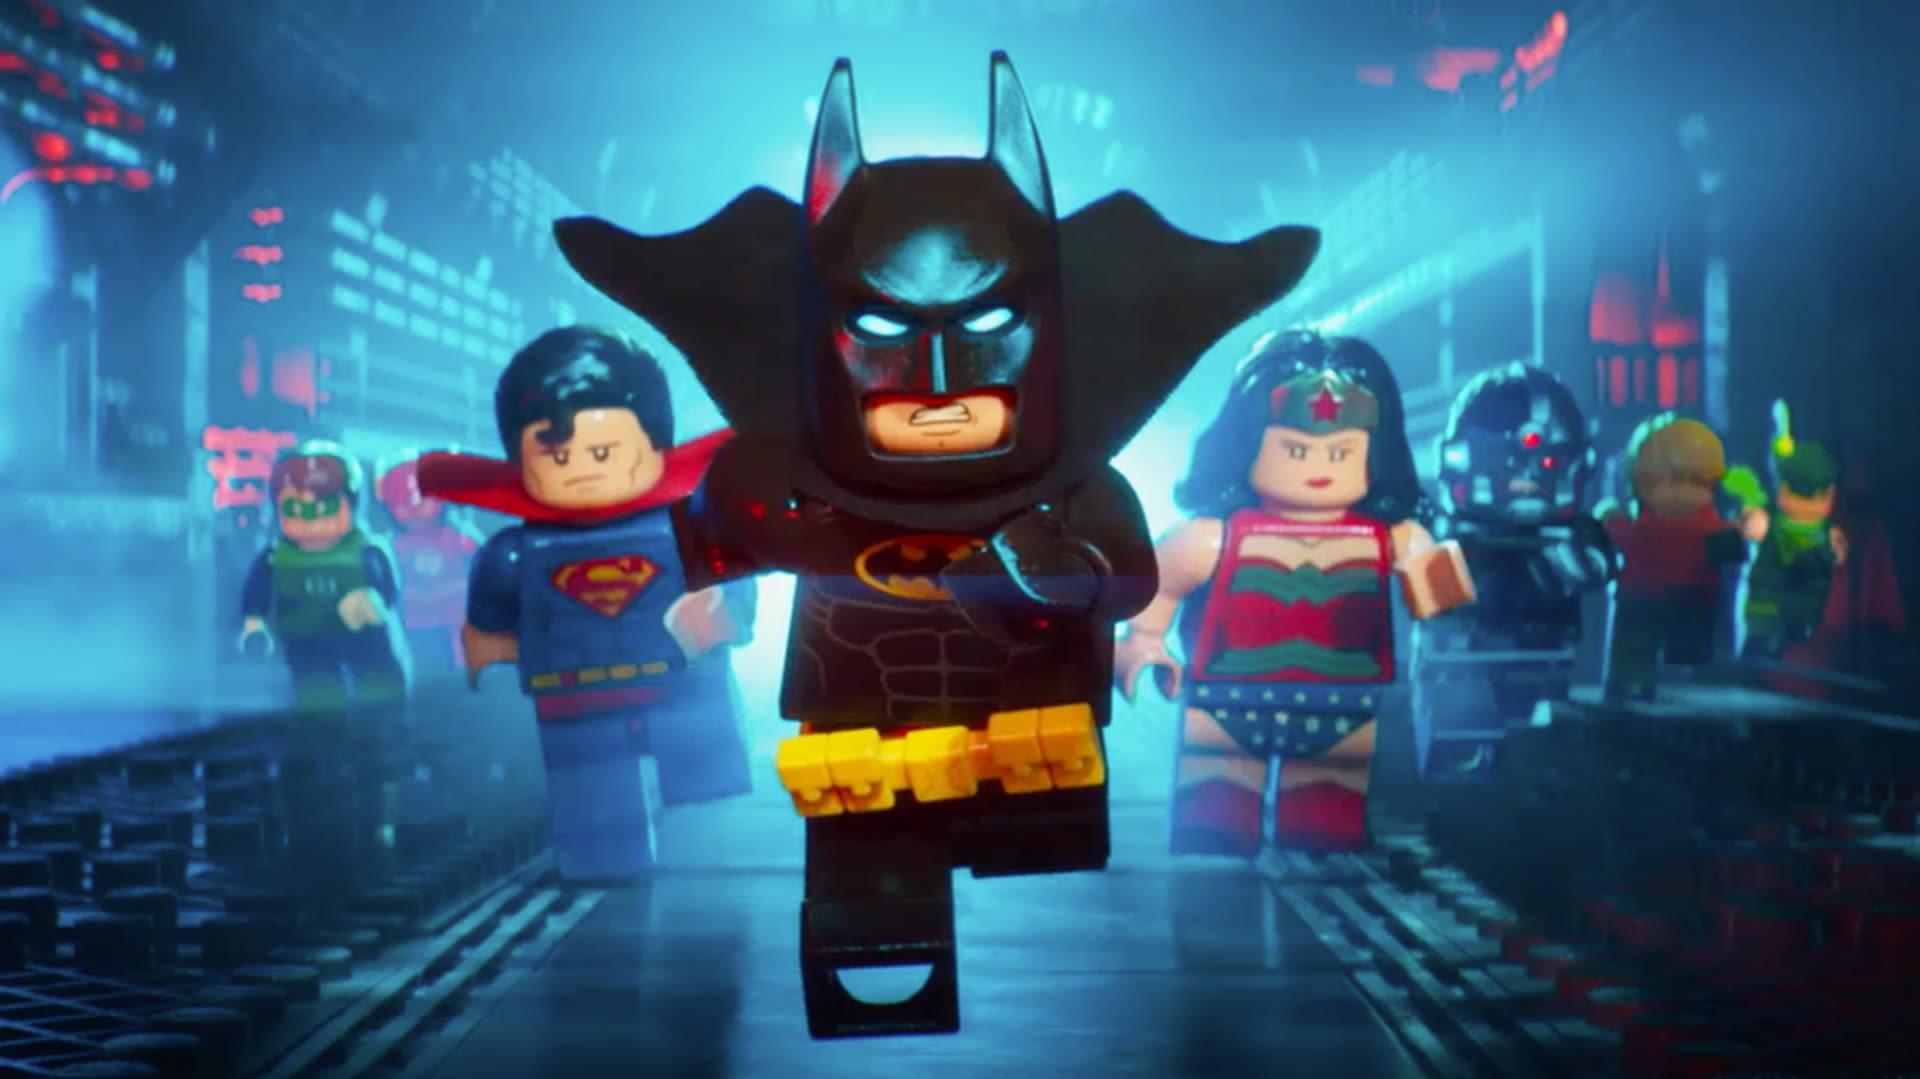 Watch How They Animated The Lego Batman Movie Design Fx Wired